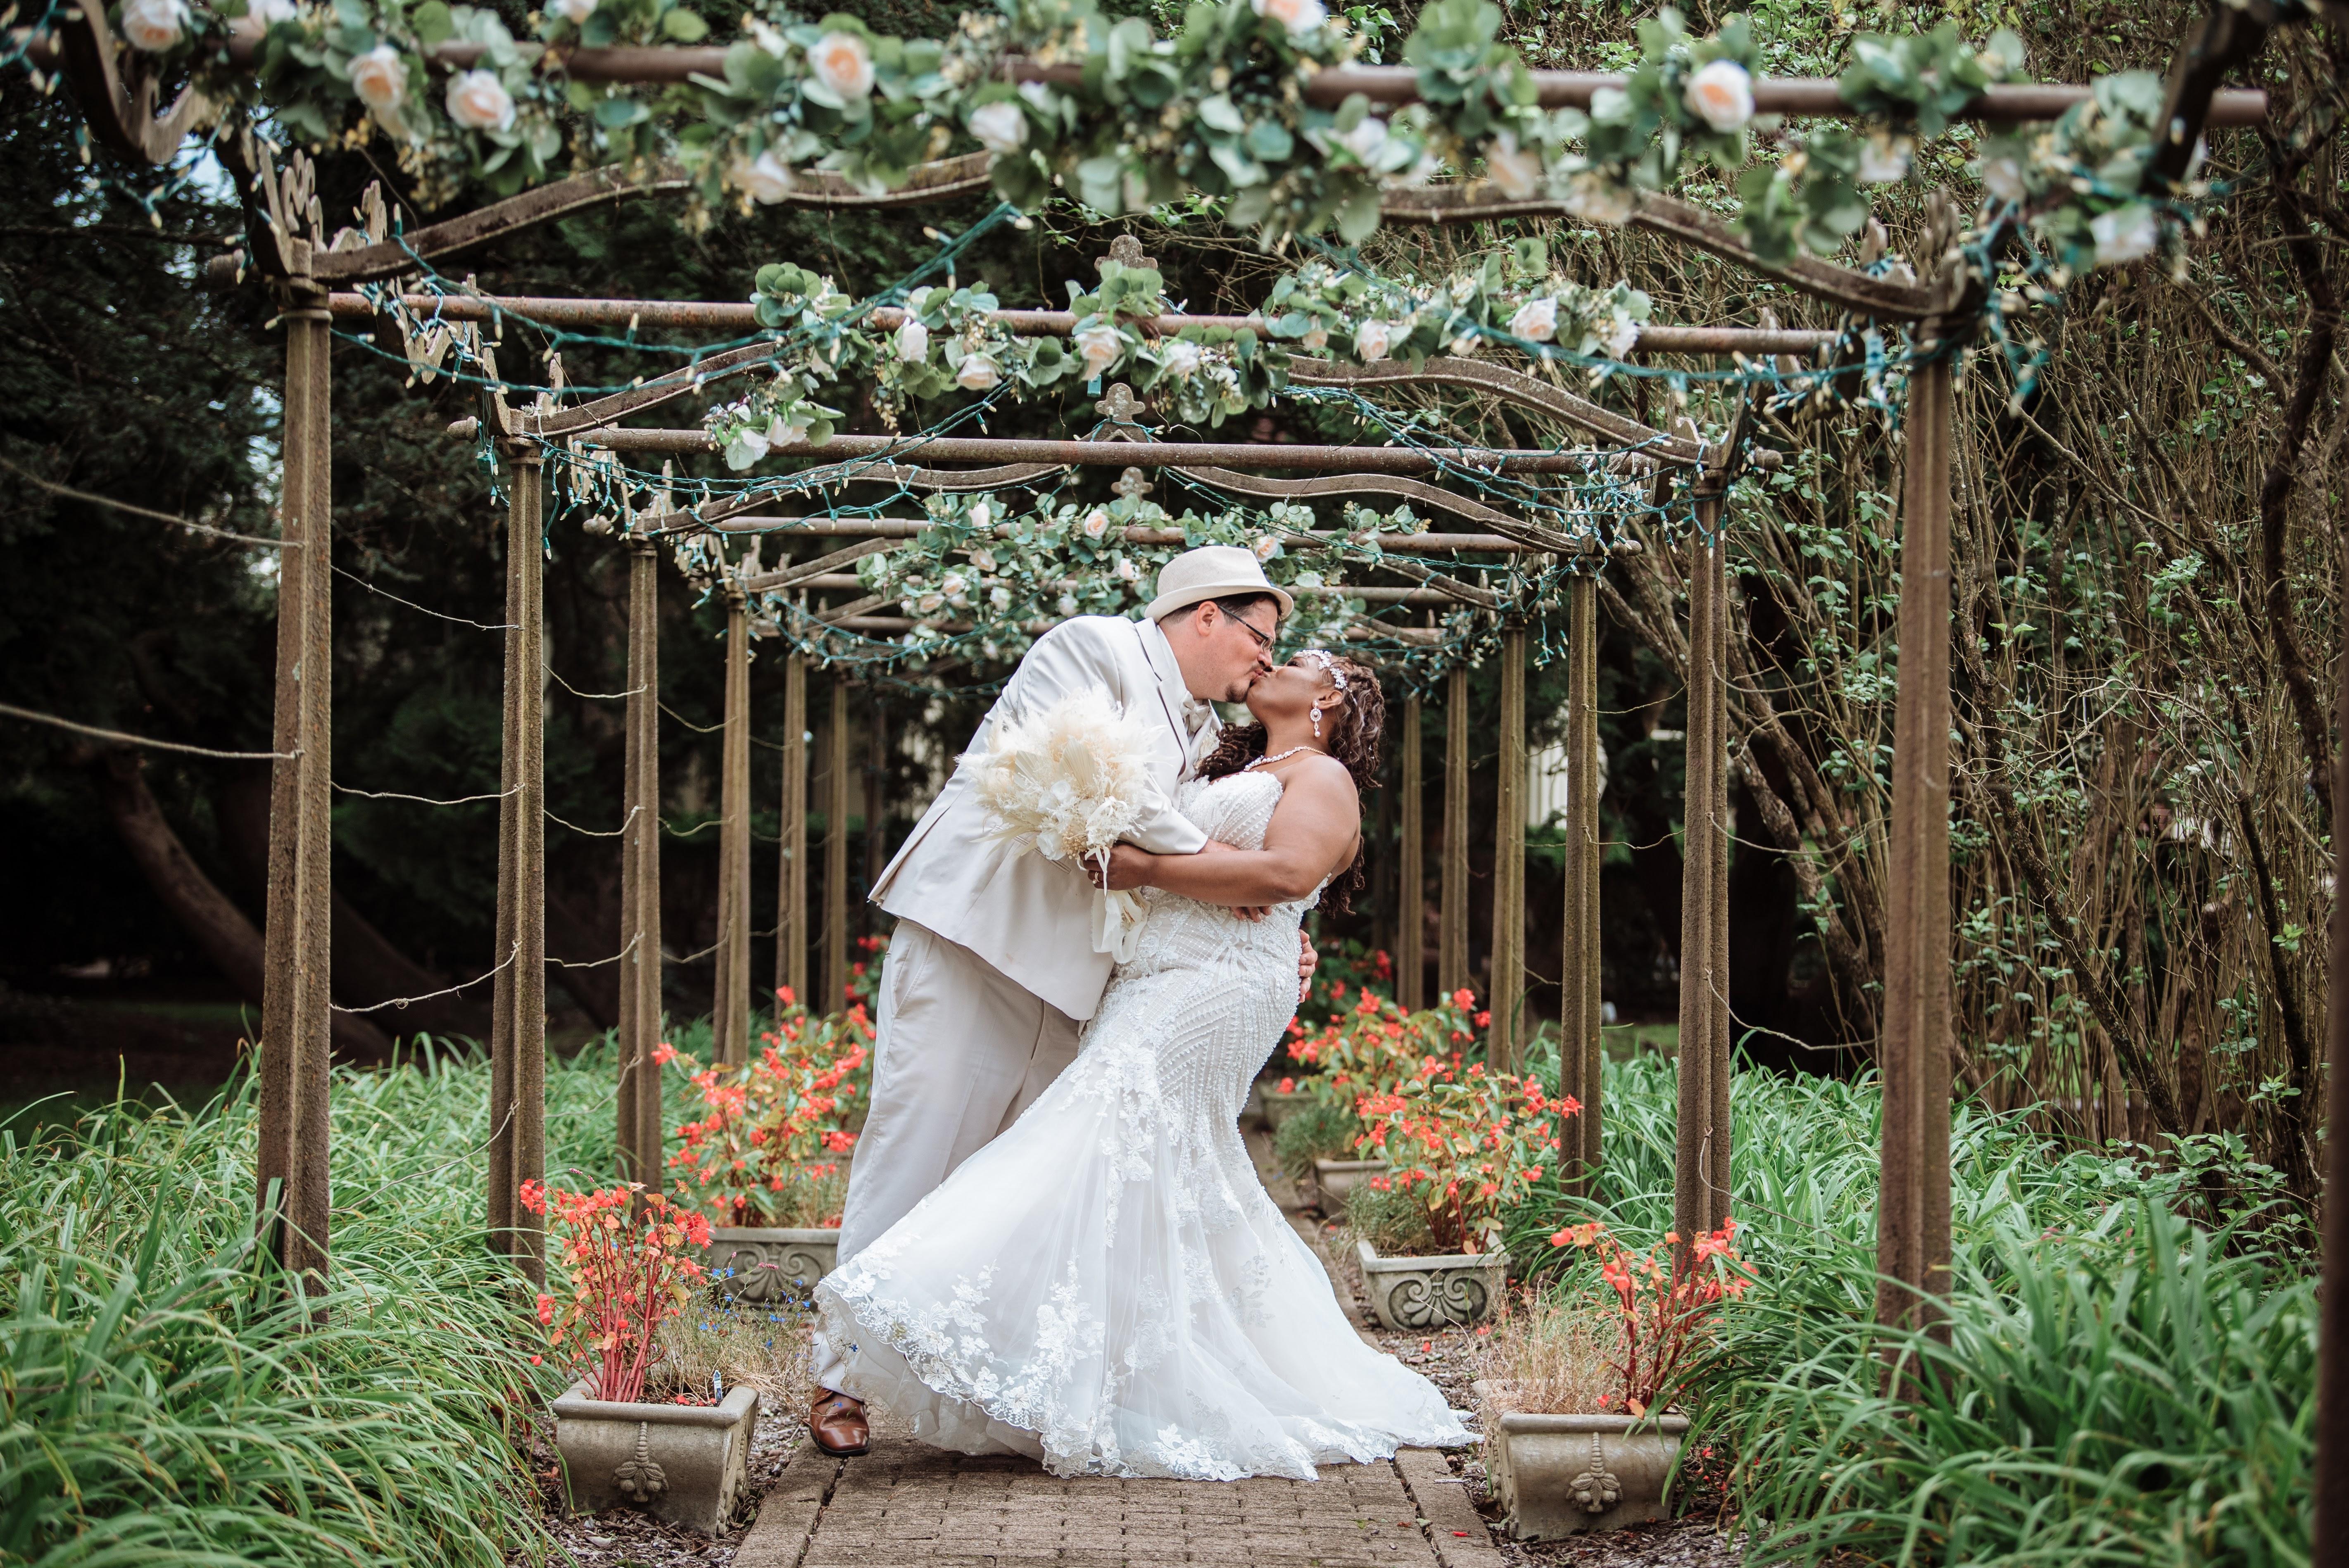 The Wedding Website of Mrs. Tawanna Kelly and Mr. Timothy Kelly